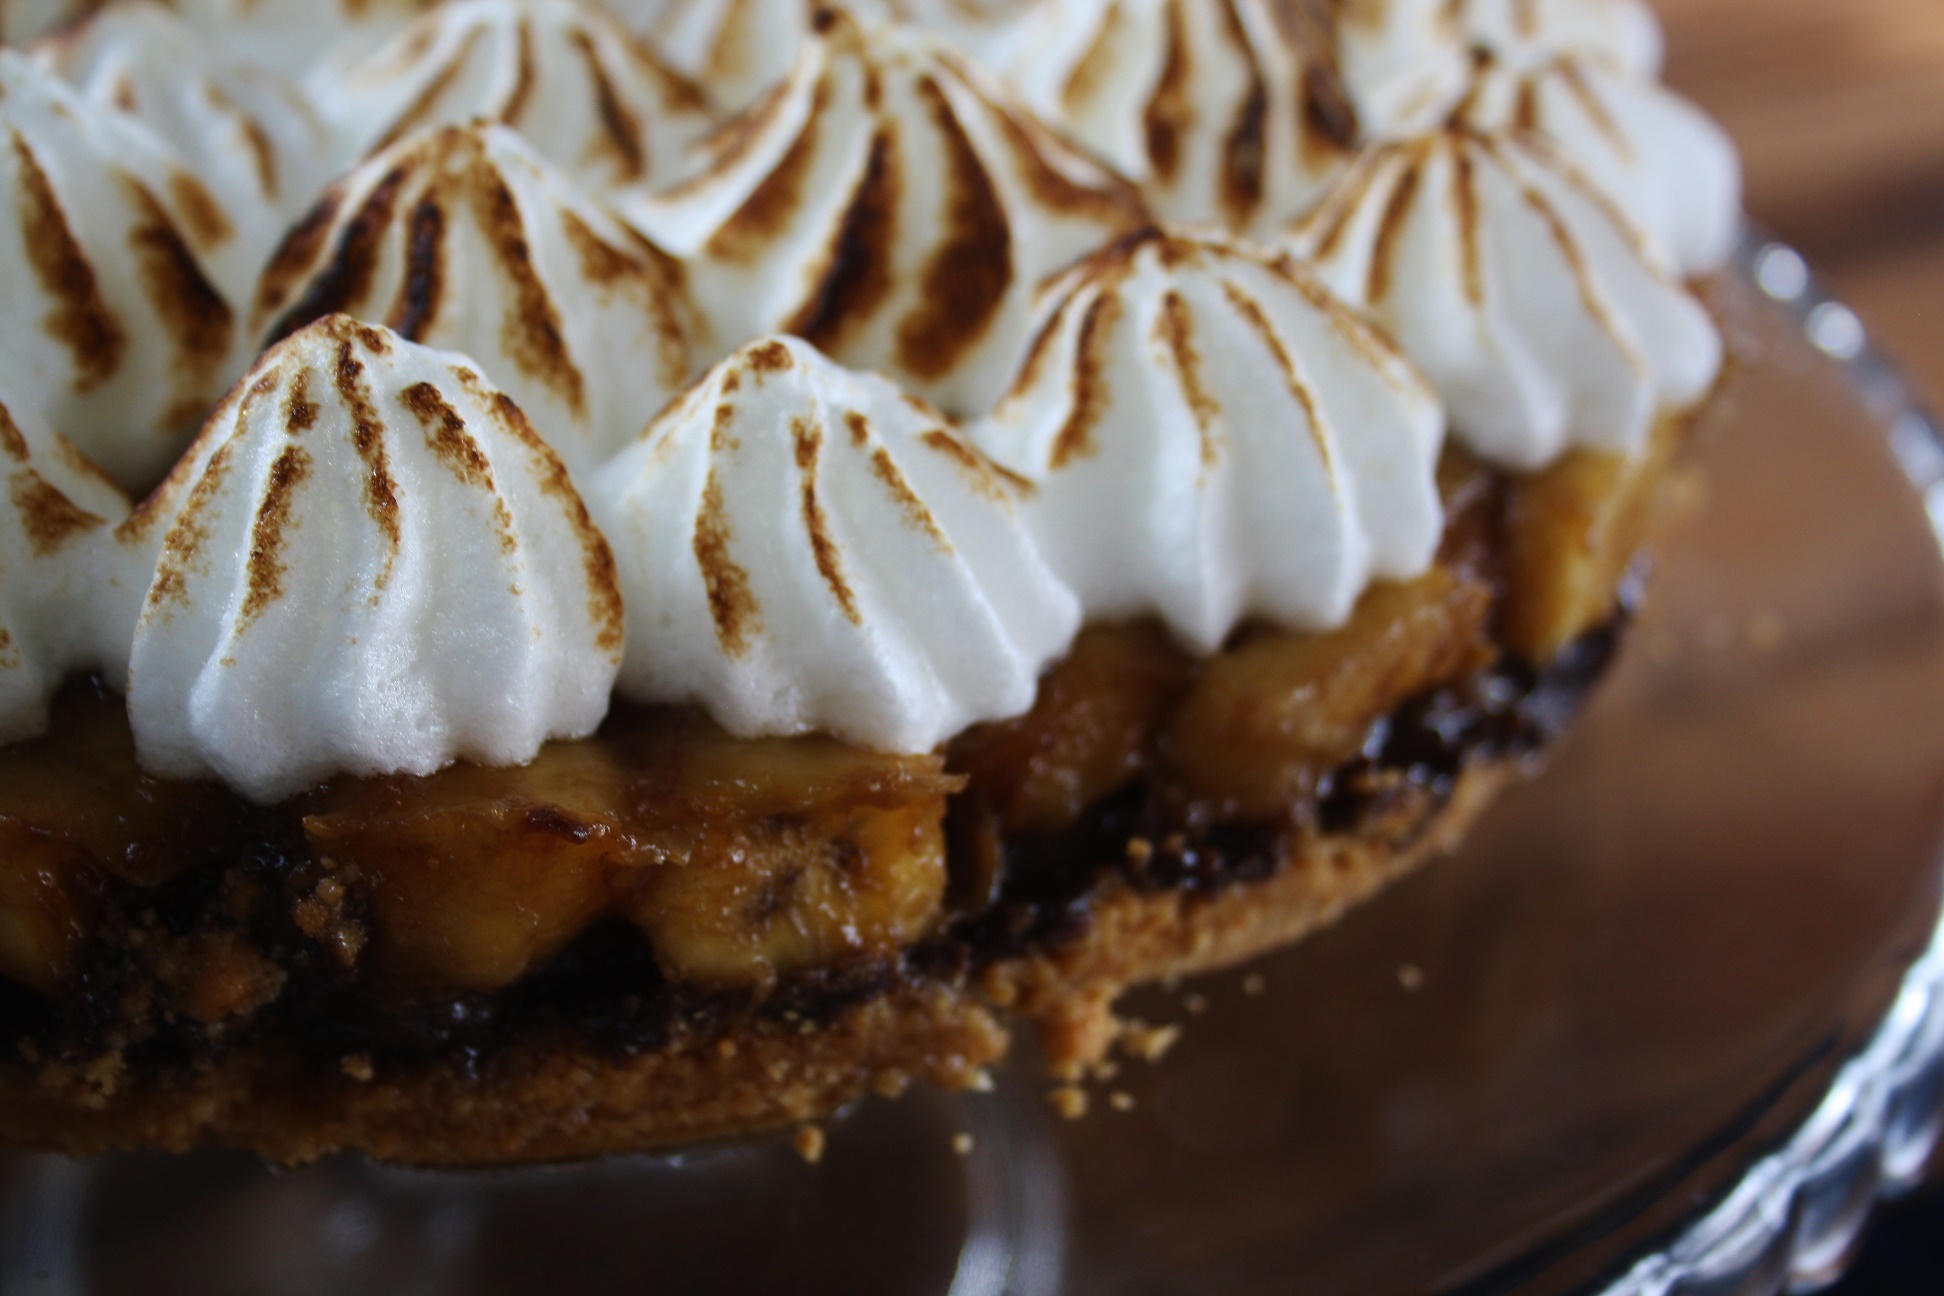 Jarred's Banoffee Pie will pull you away from the view